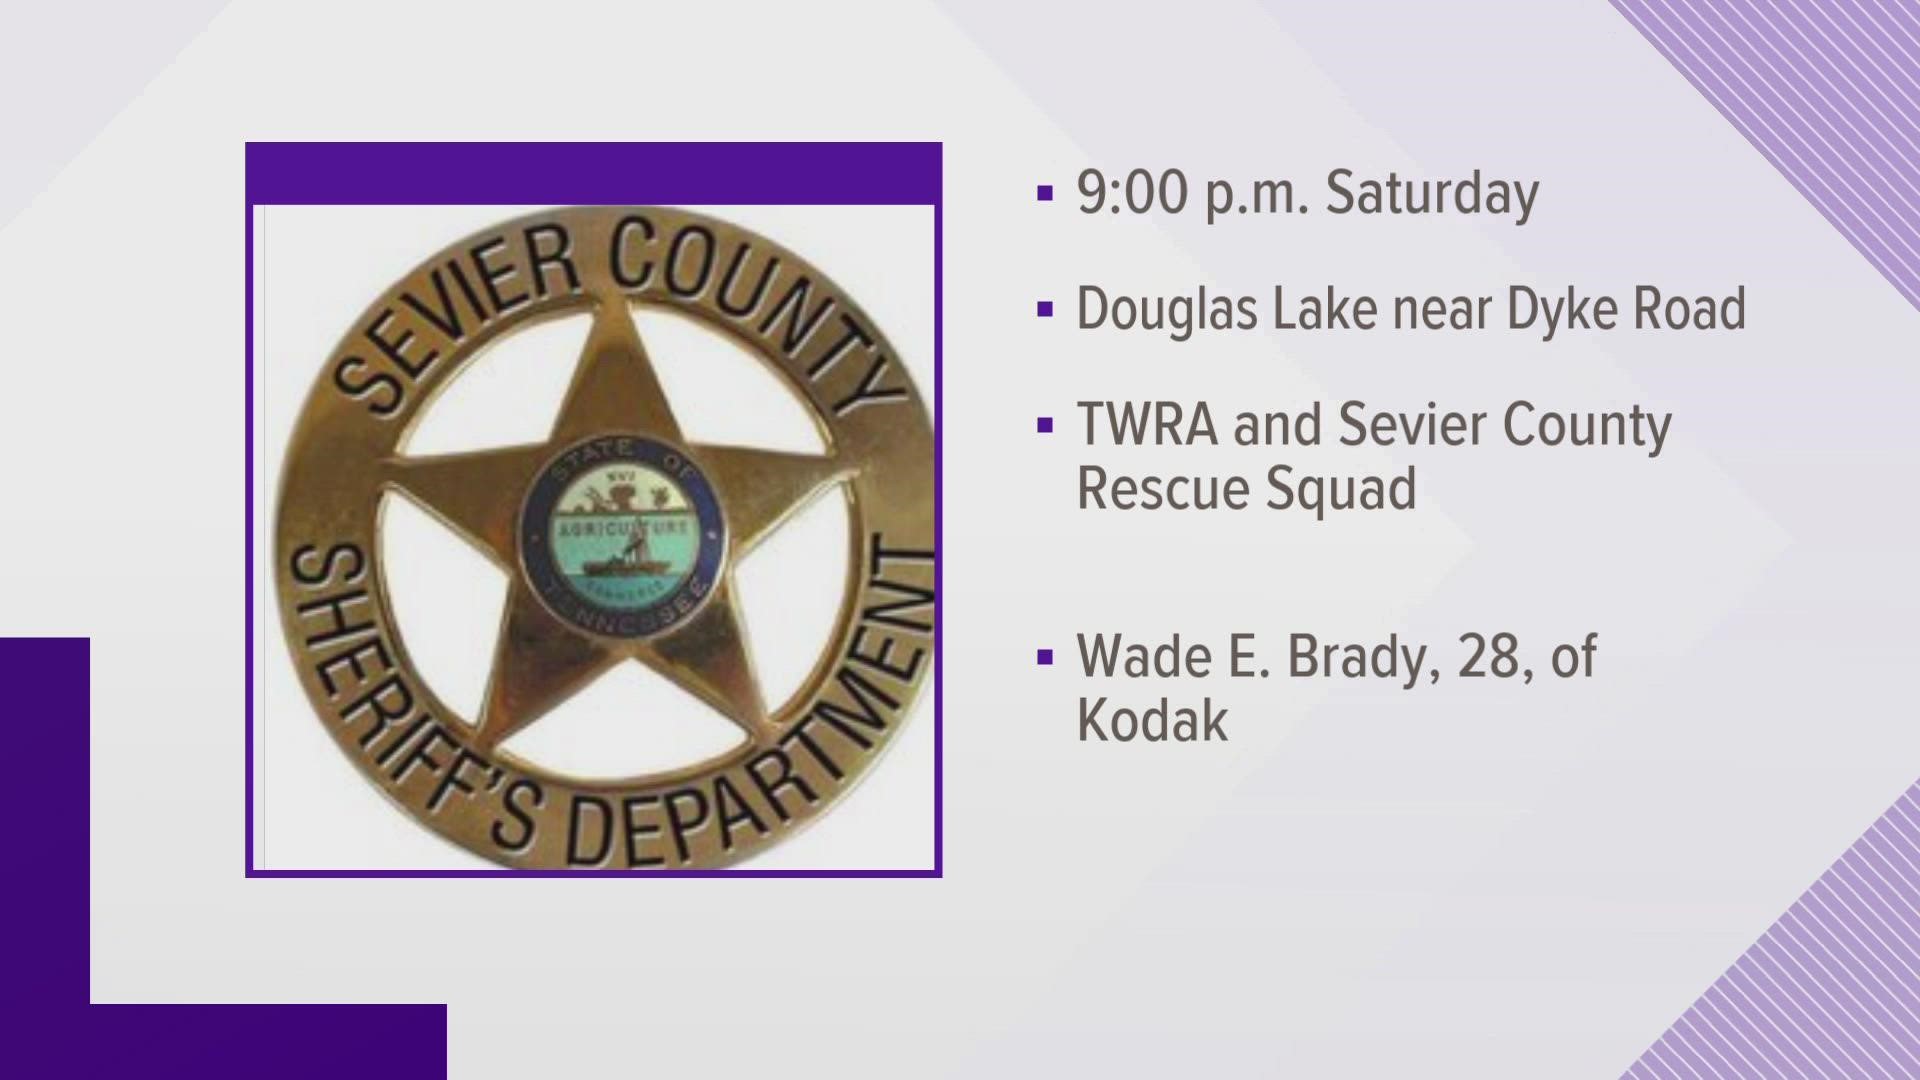 According to the Sevier County Sheriff's Office, one person is dead after drowning at Douglas Lake around 9 Saturday night near Dyke Road.